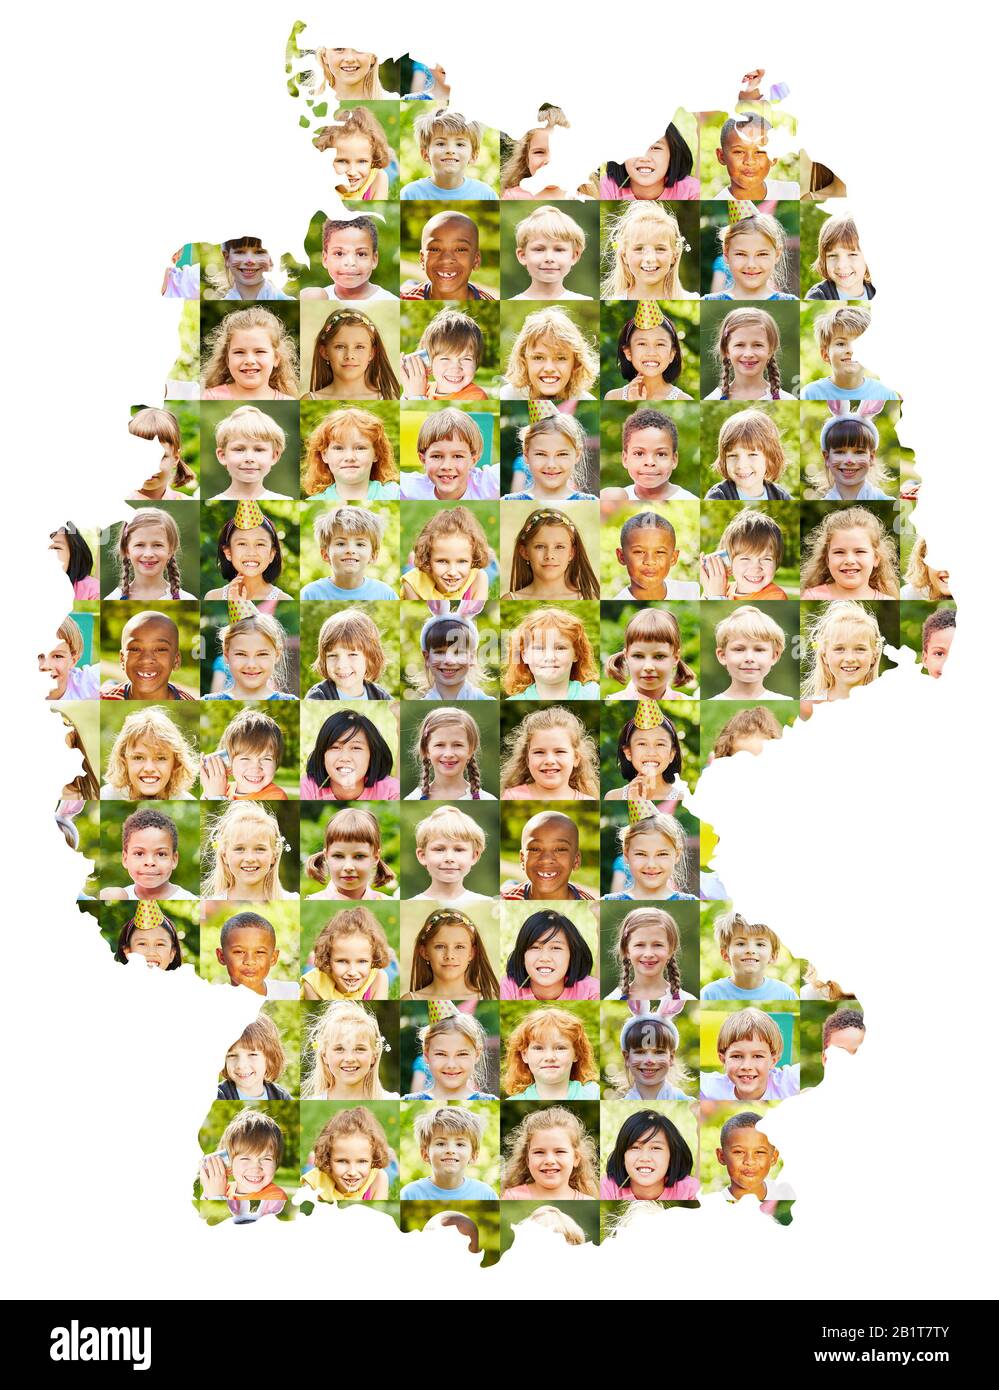 Collage of children's portraits on Germany map as a diverse concept for childhood and society Stock Photo